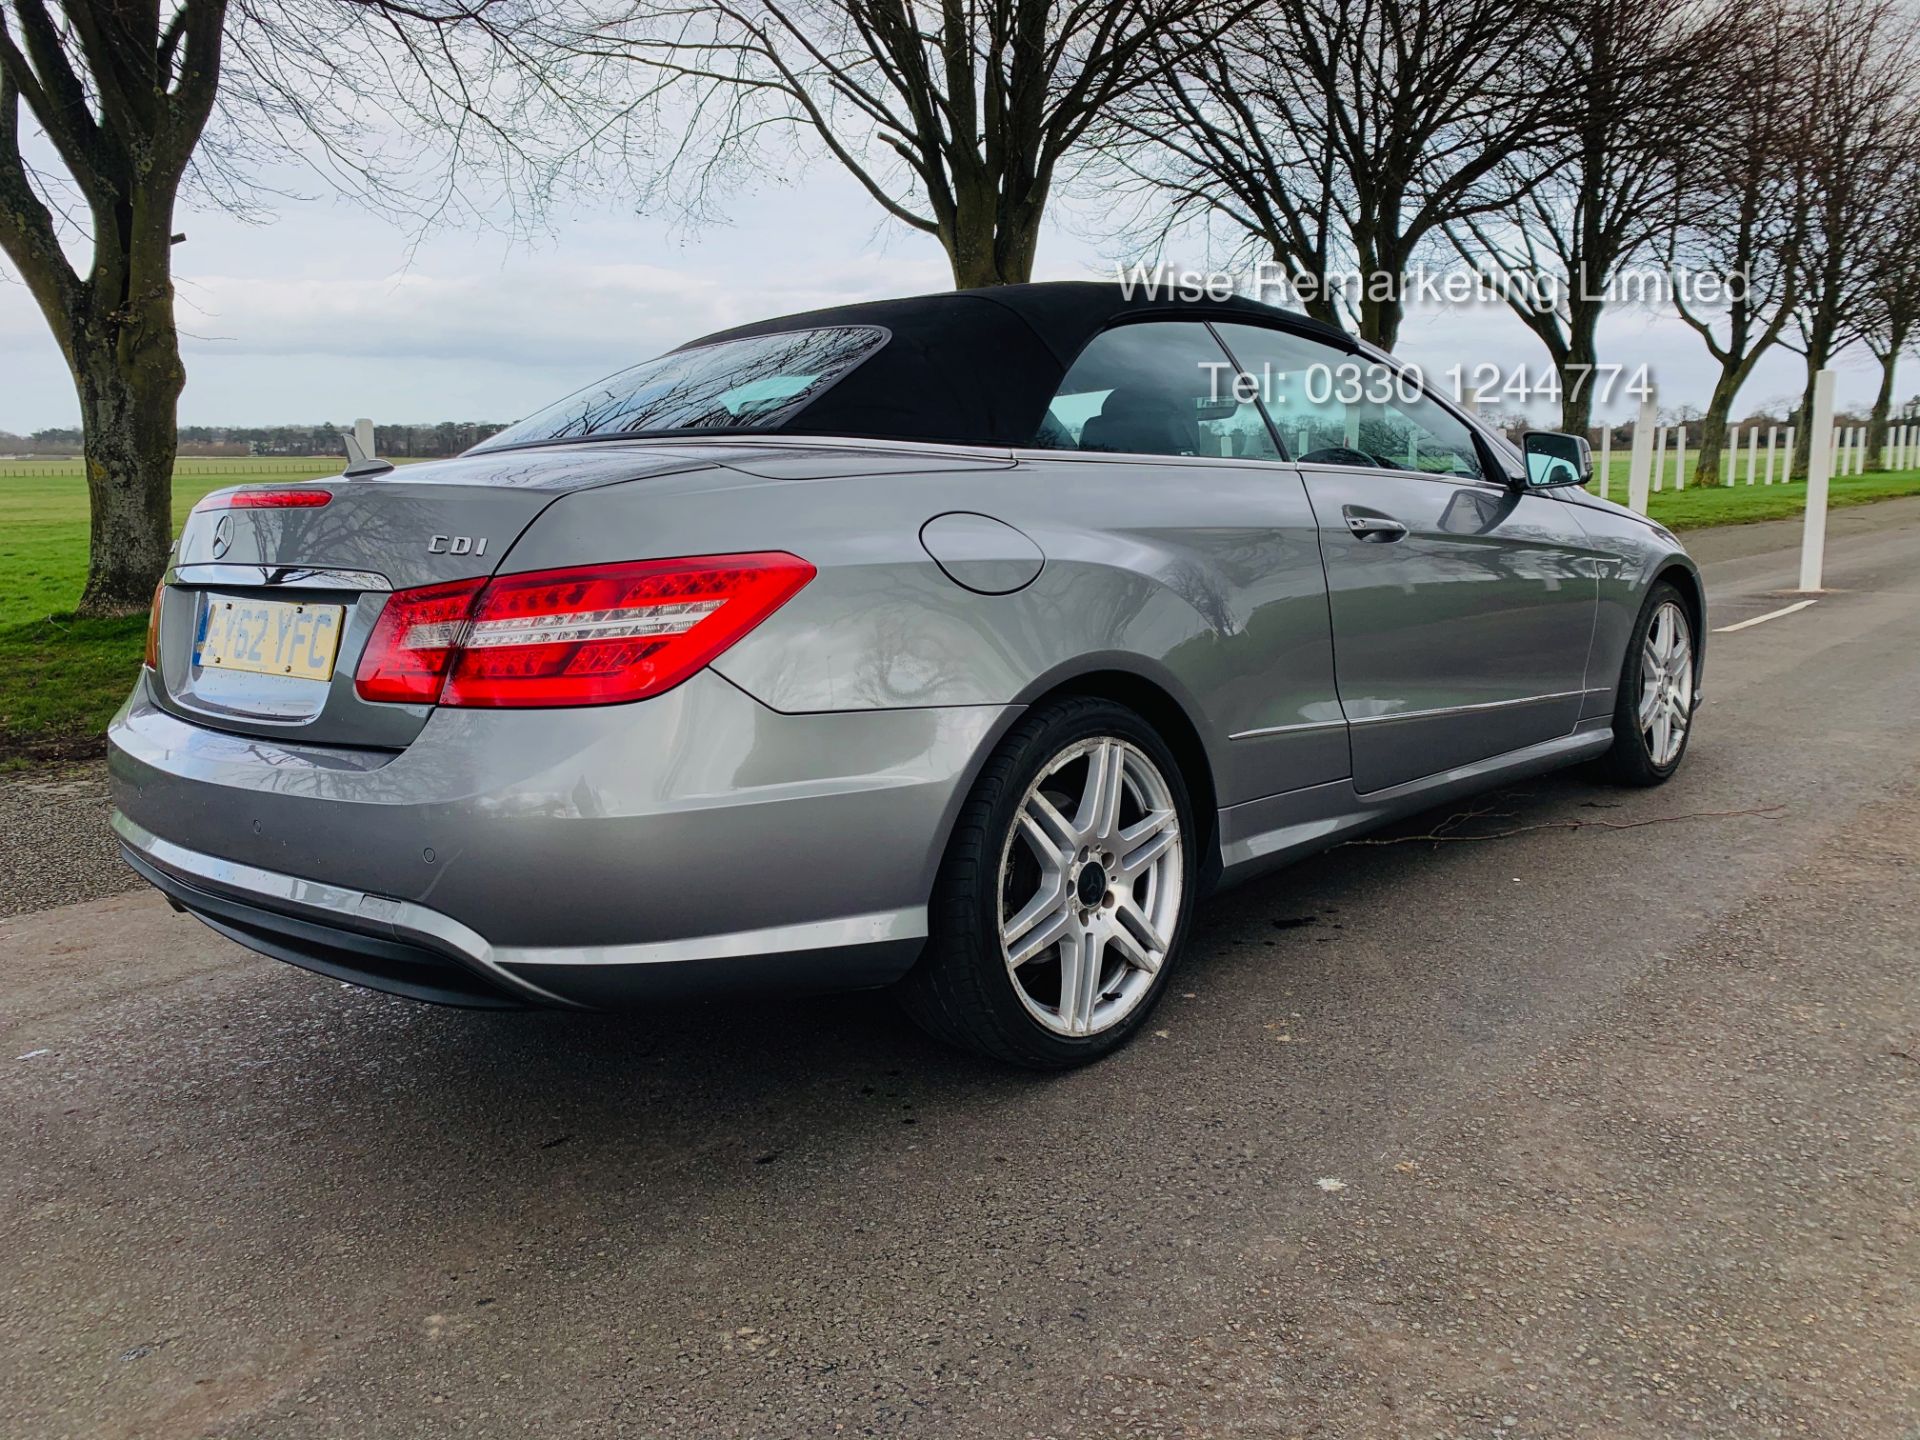 Mercedes E250 CDI Convertible Sport Tip Auto - 2013 Model - Service History - Leather - Parking aid - Image 6 of 27